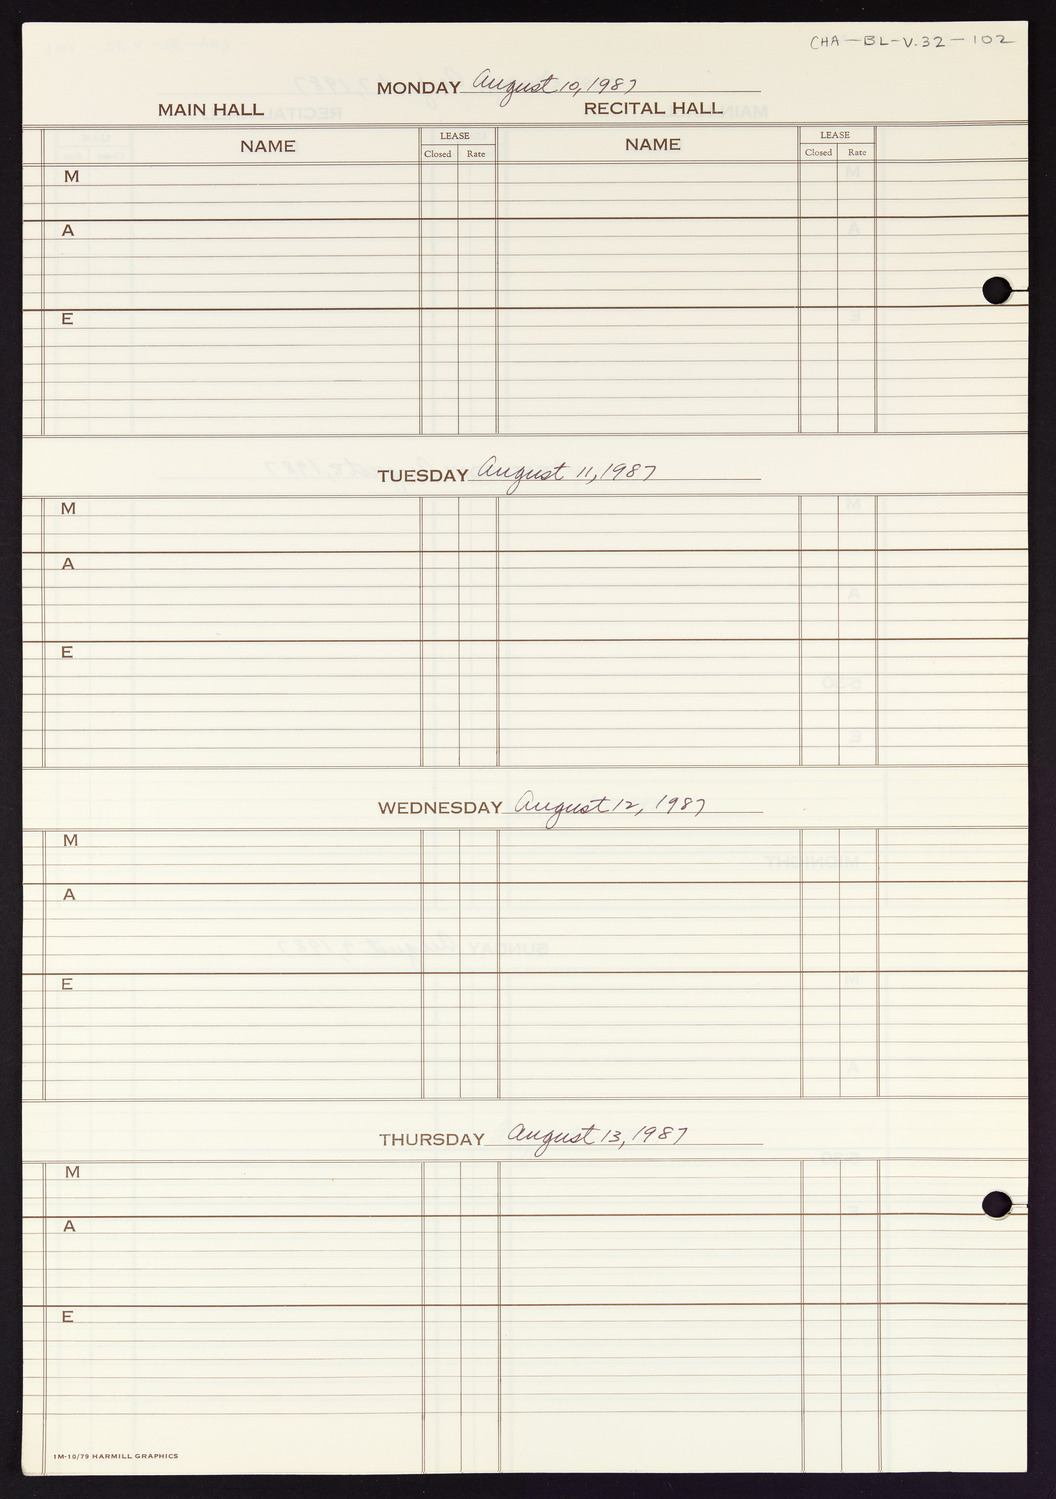 Carnegie Hall Booking Ledger, volume 32, page 102